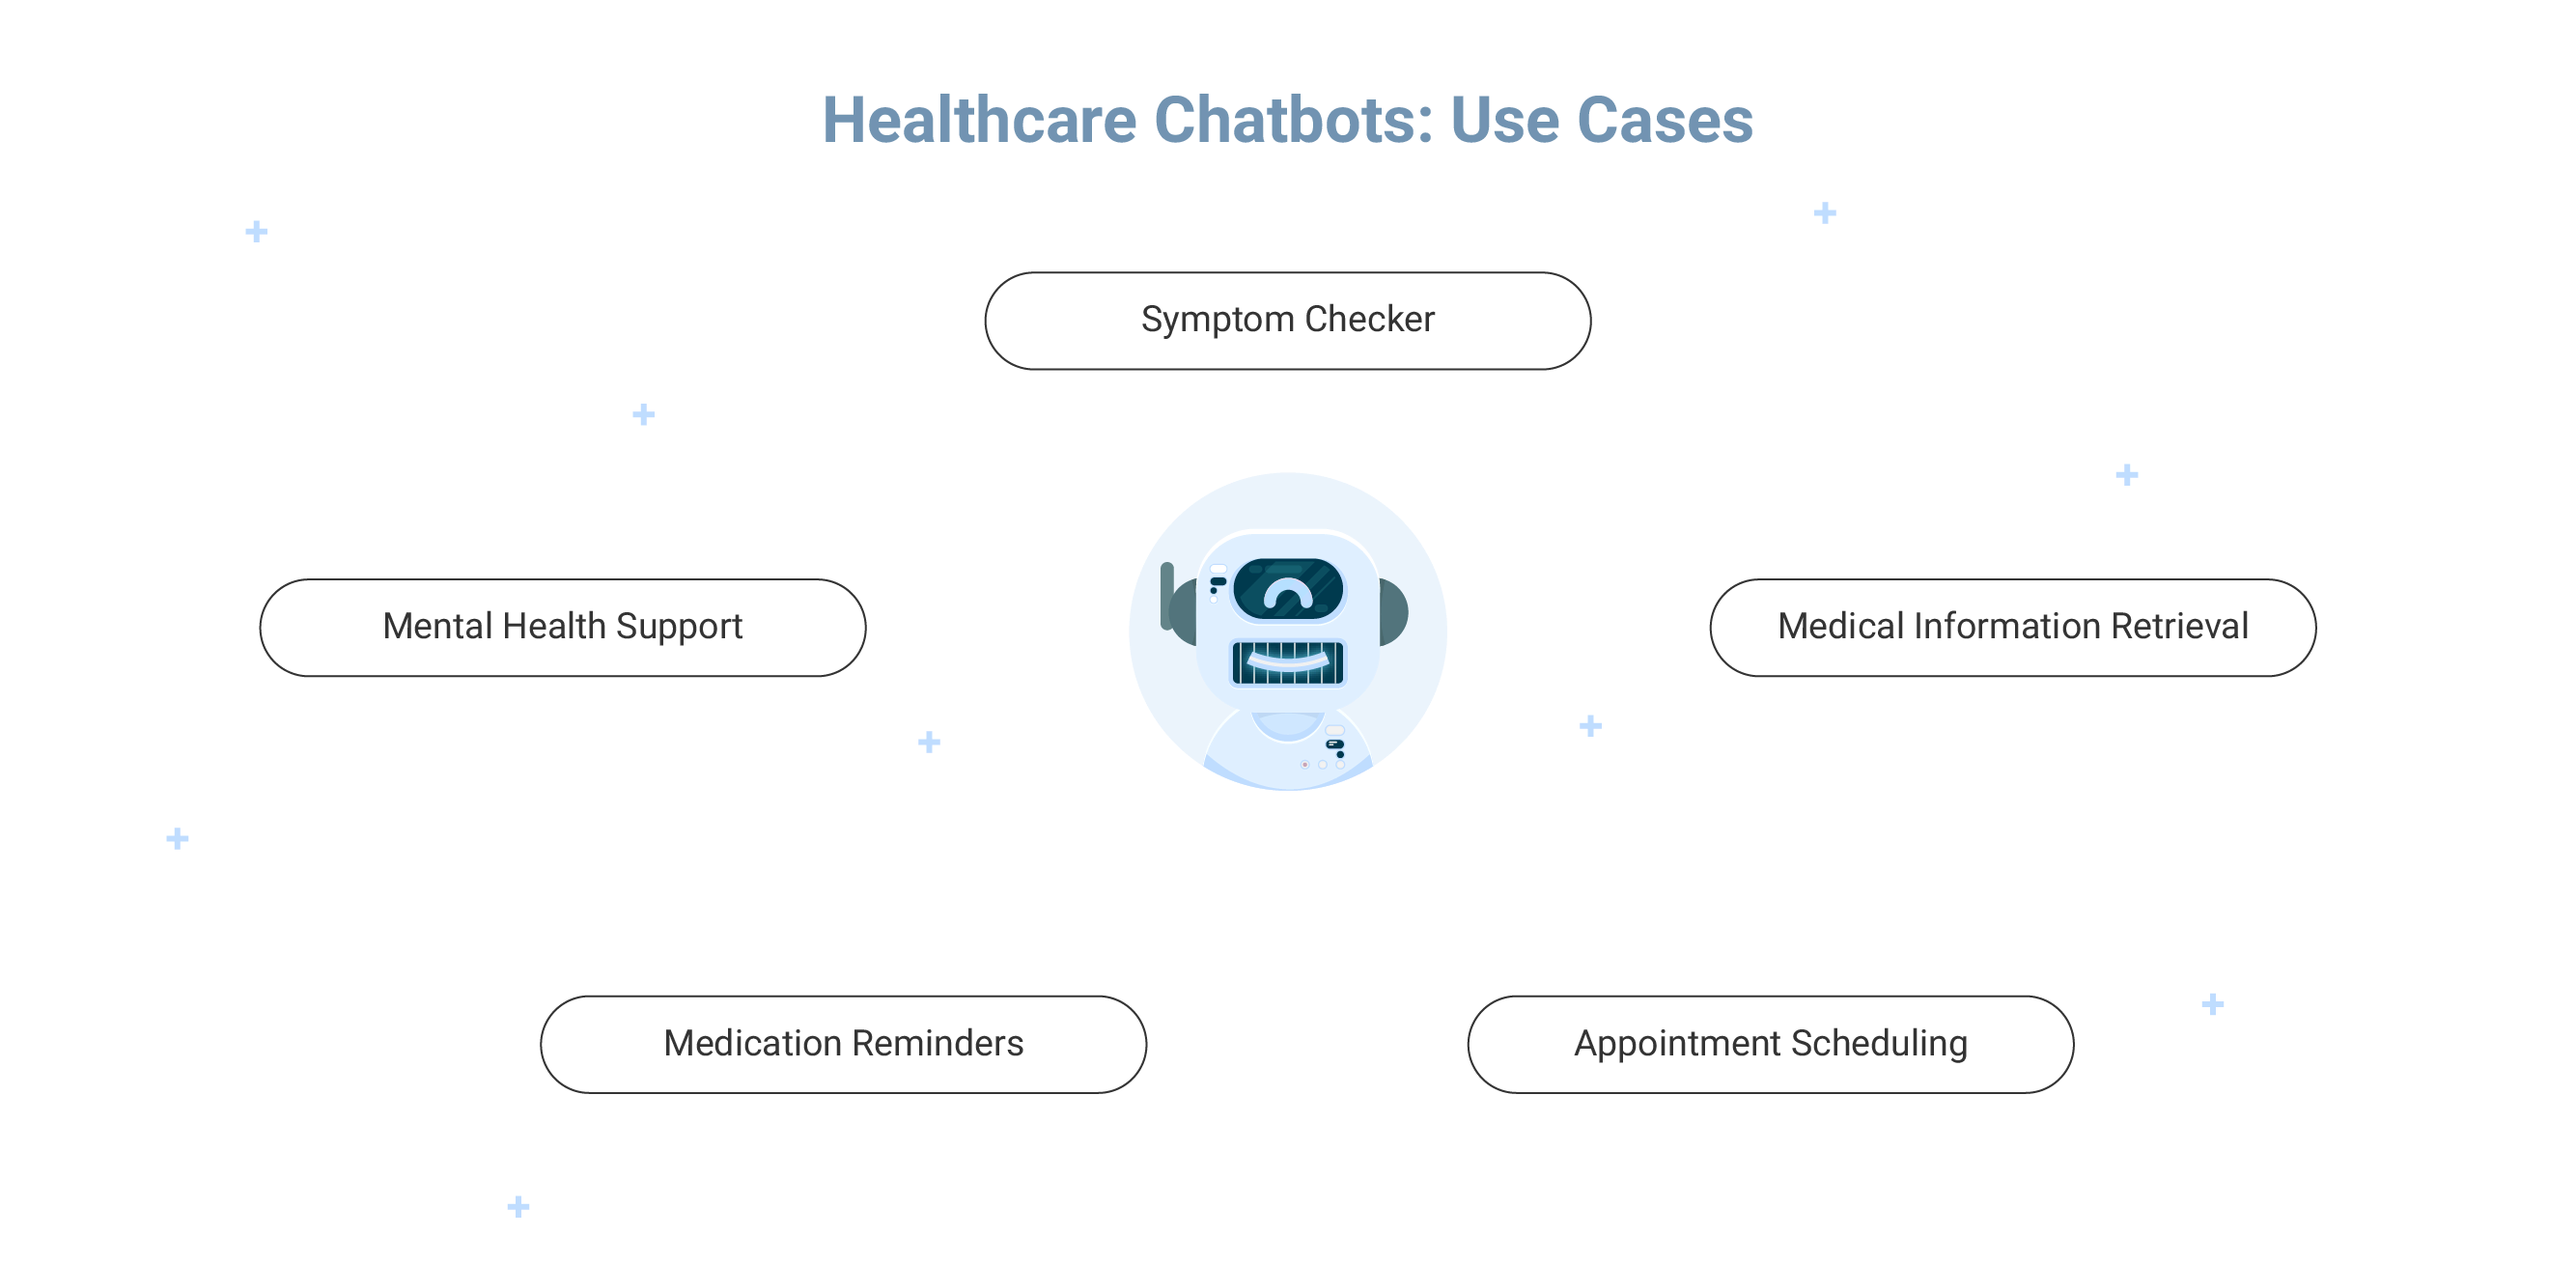 Healthcare Chatbots: Use Cases